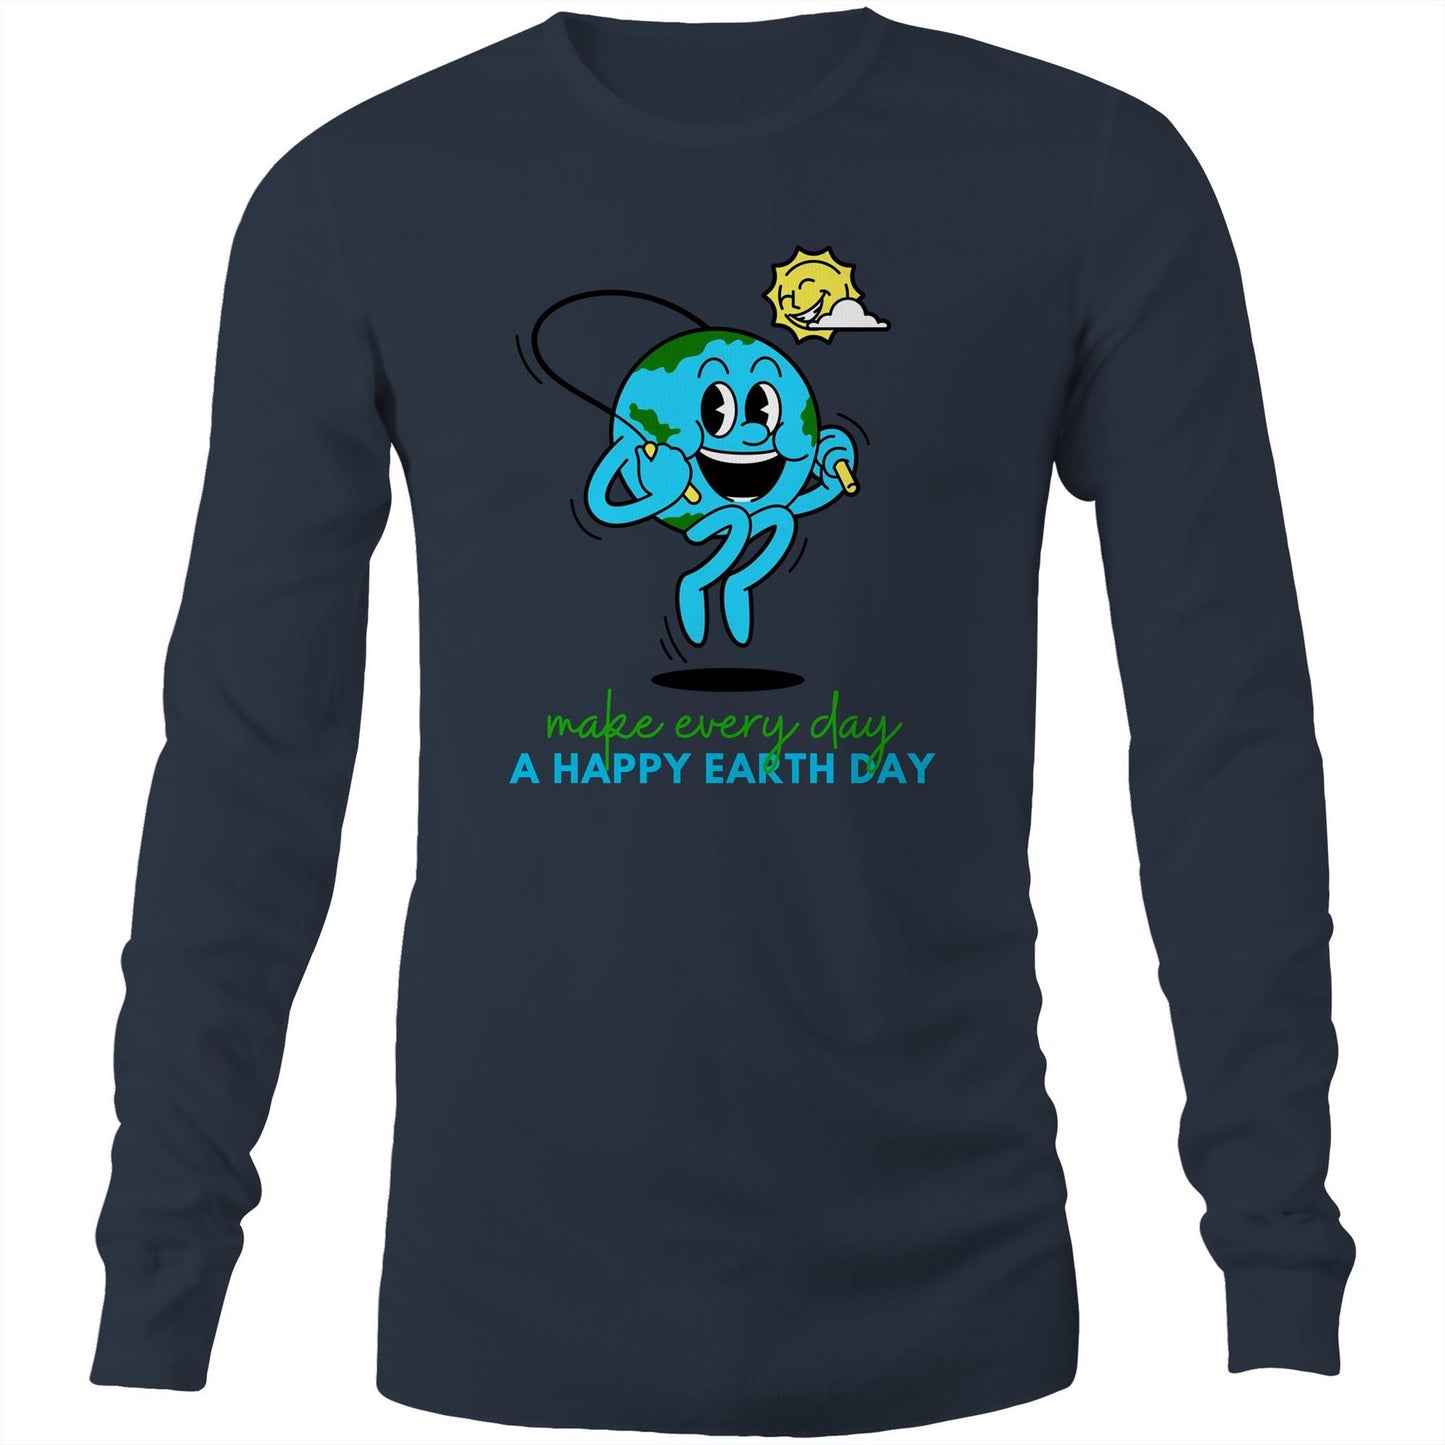 Make Every Day A Happy Earth Day - Long Sleeve T-Shirt Navy Unisex Long Sleeve T-shirt Environment